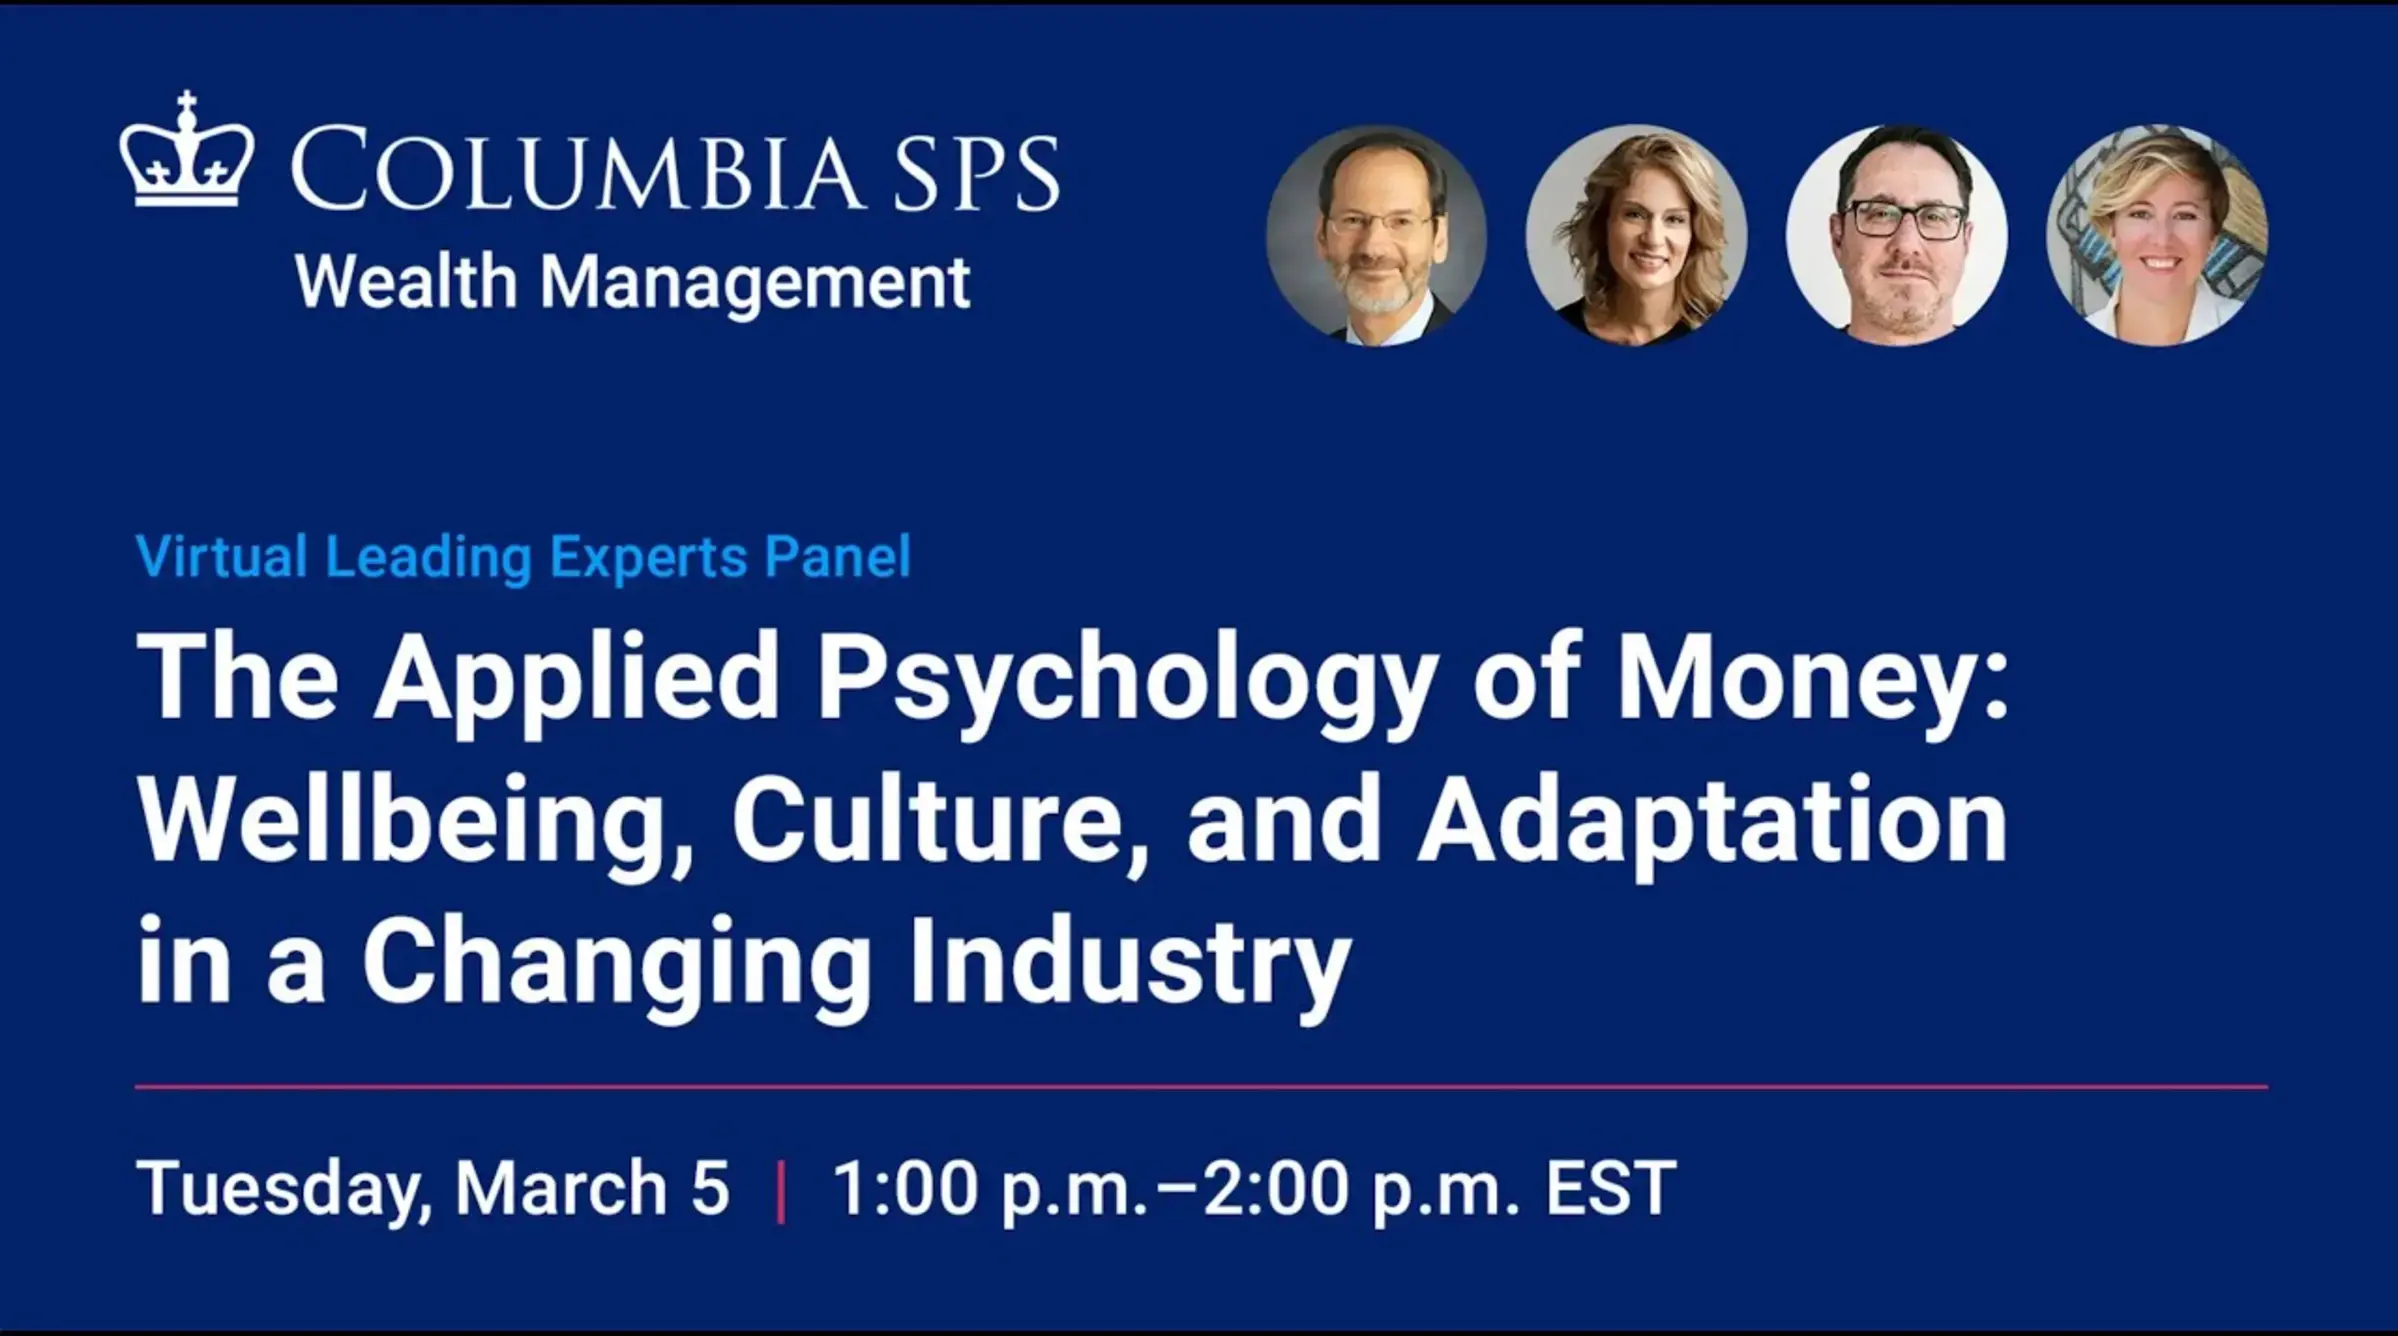 The Applied Psychology of Money: Wellbeing, Culture, and Adaptation in a Changing Industry